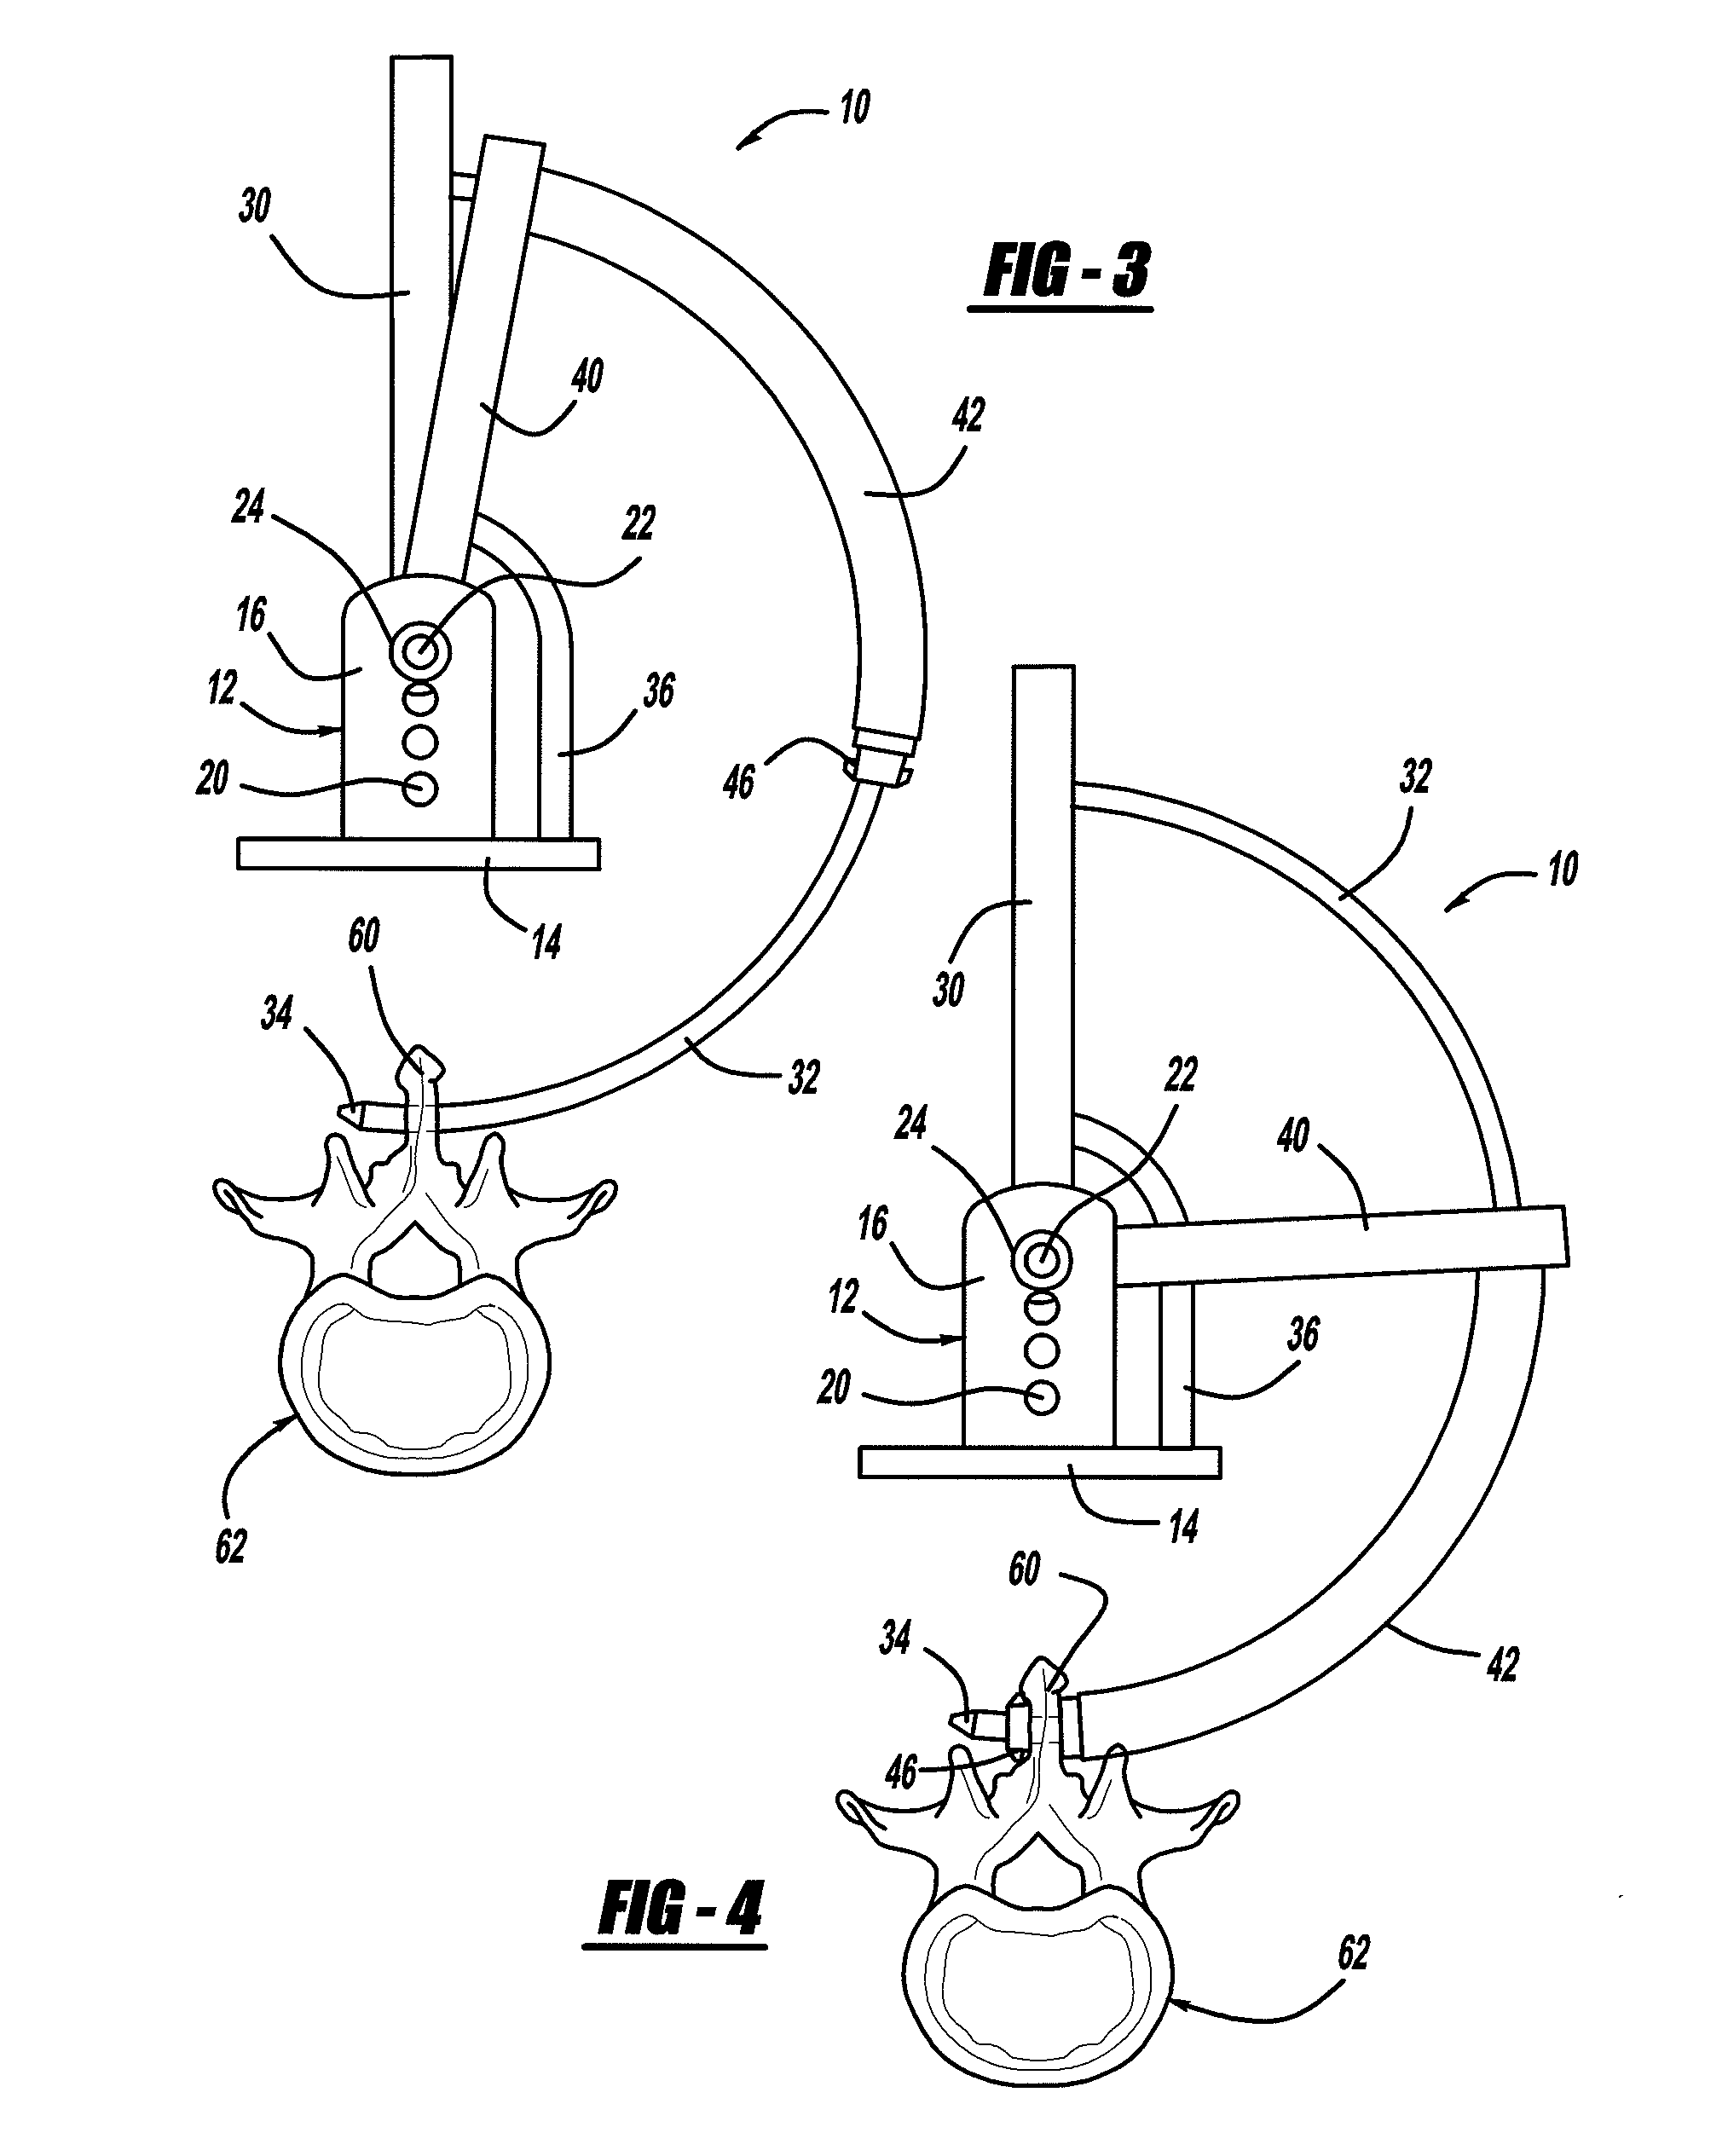 Interspinous Process Spacer Device